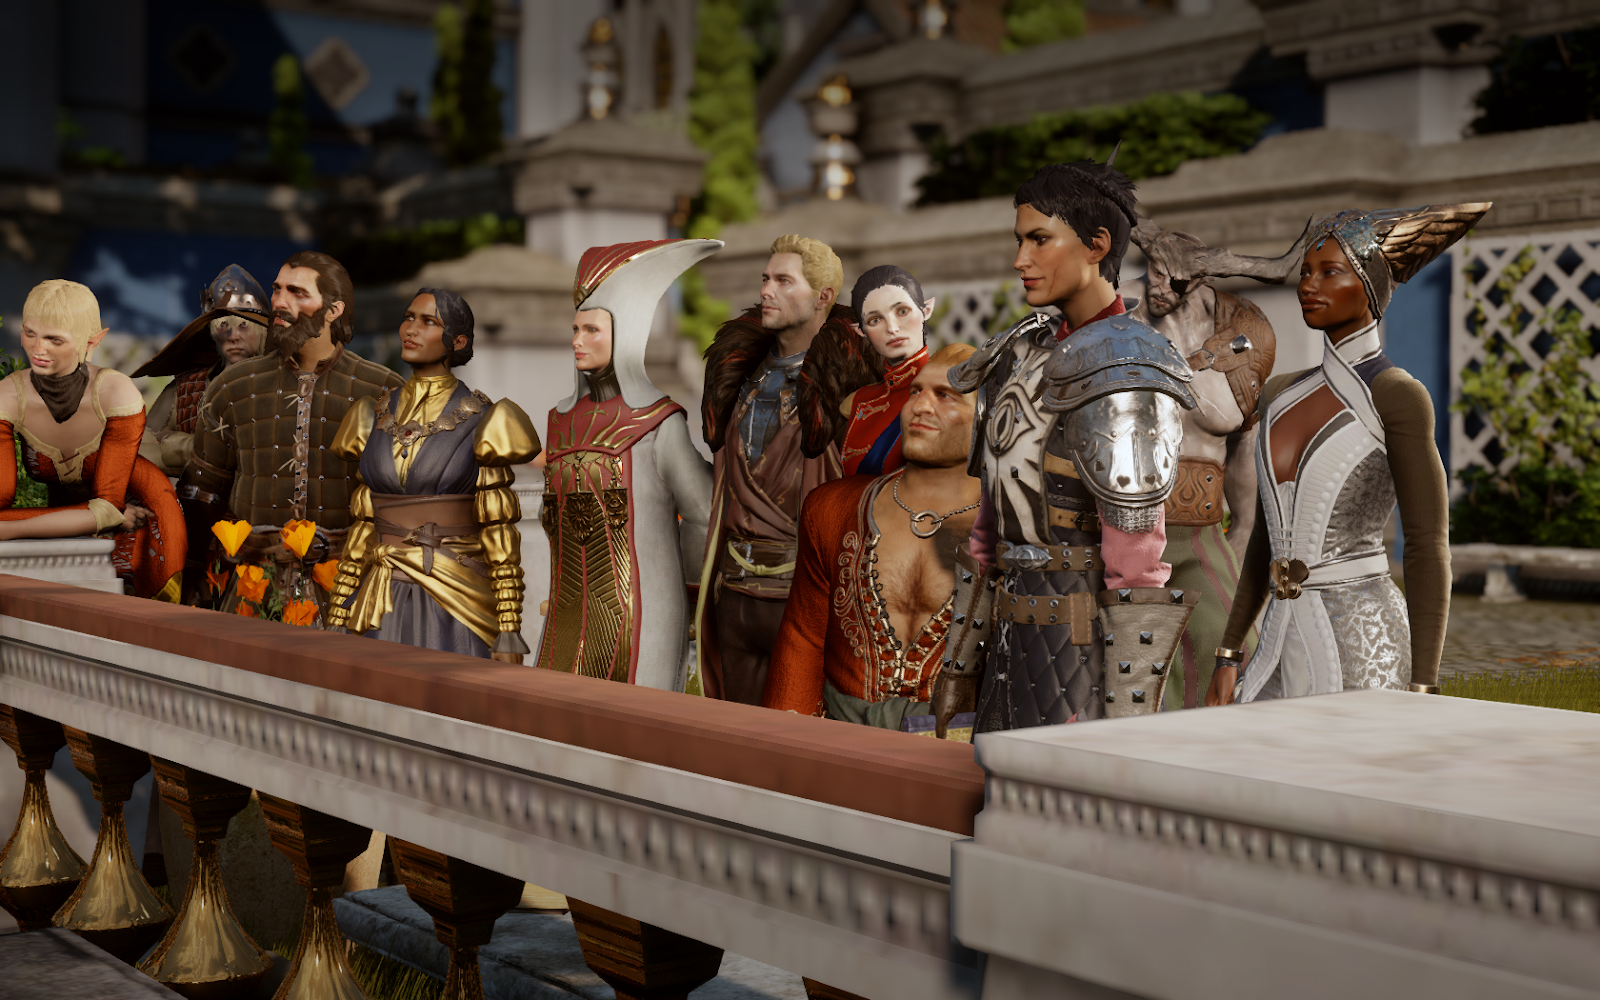 Dragon Age Inquisition: How To Romance Harding